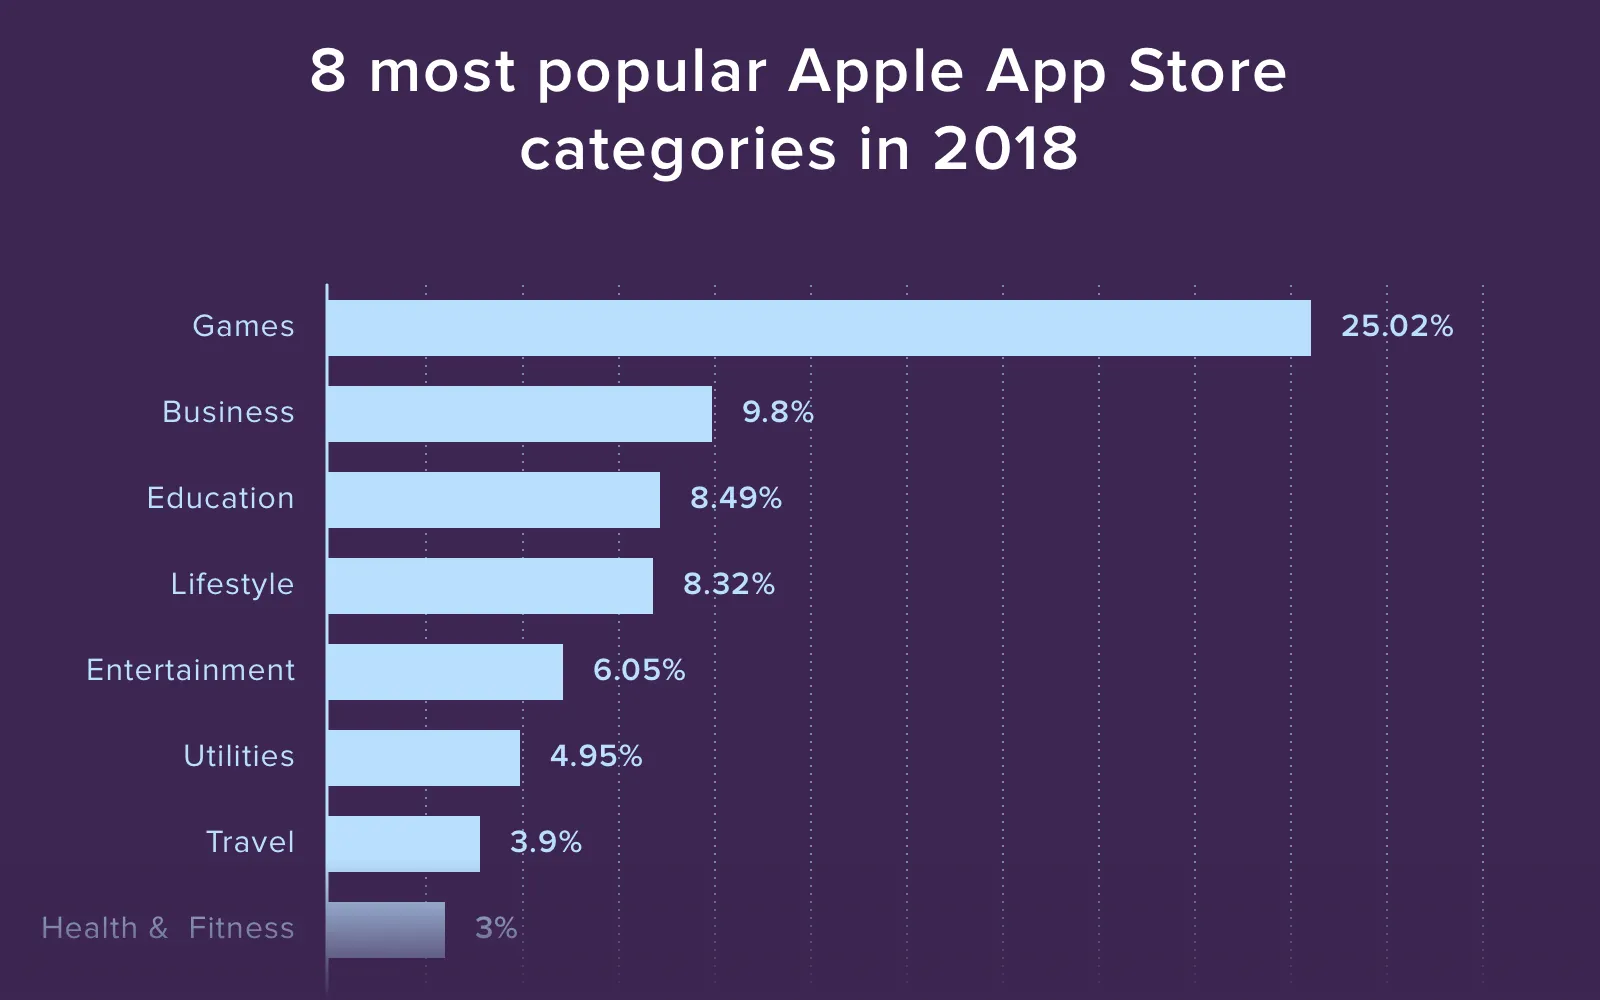 Look through the top app categories in app stores to decide on what kind of app idea to focus on